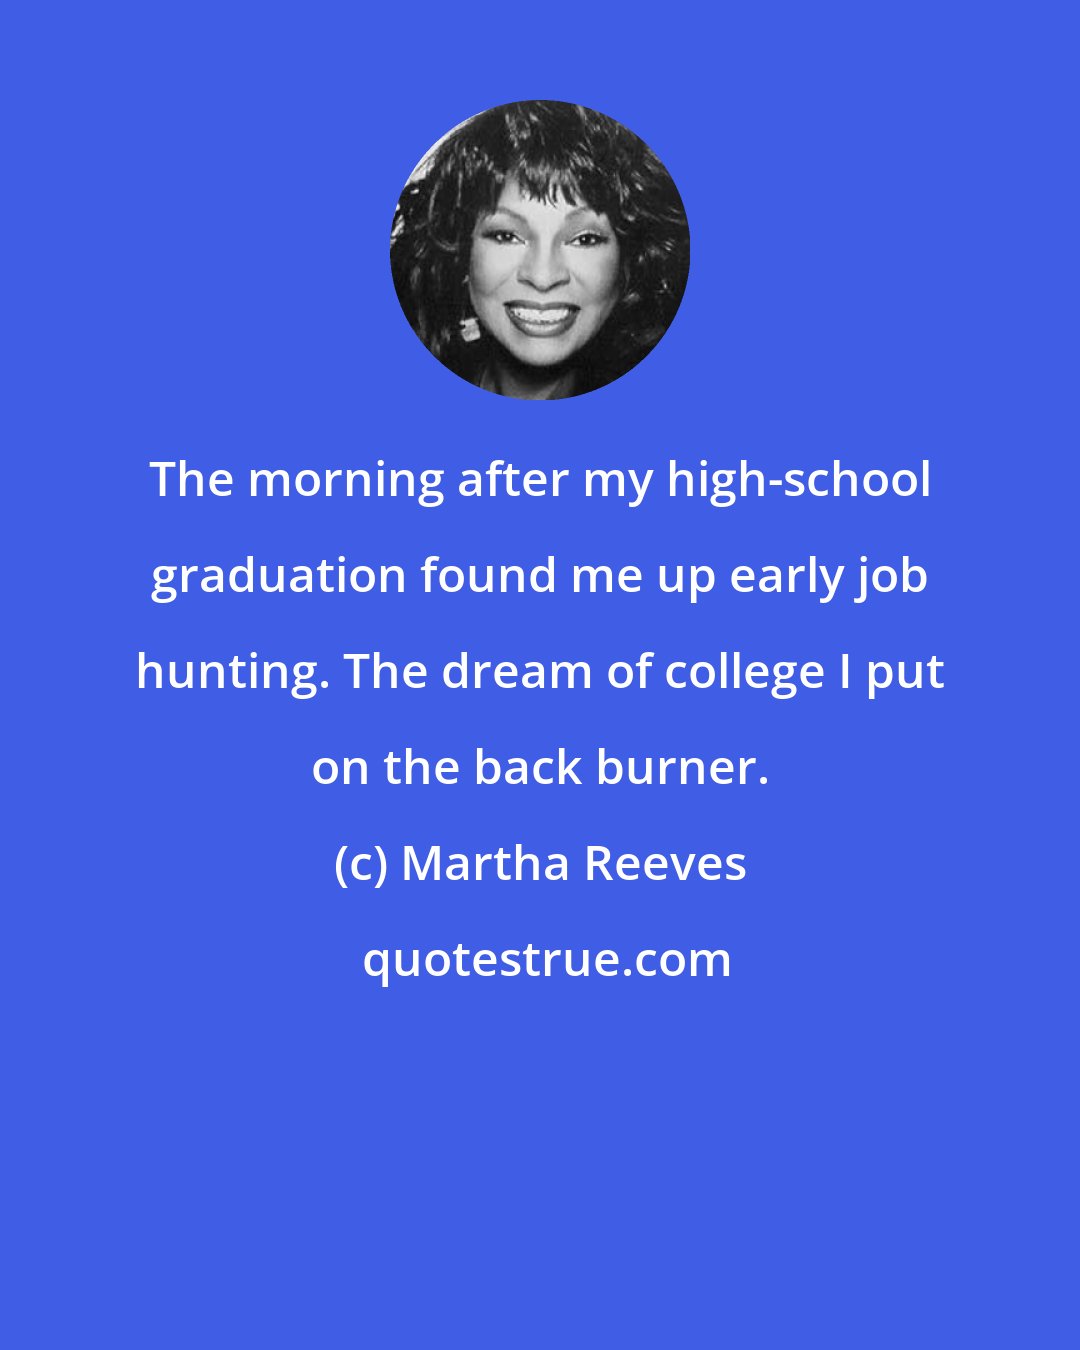 Martha Reeves: The morning after my high-school graduation found me up early job hunting. The dream of college I put on the back burner.